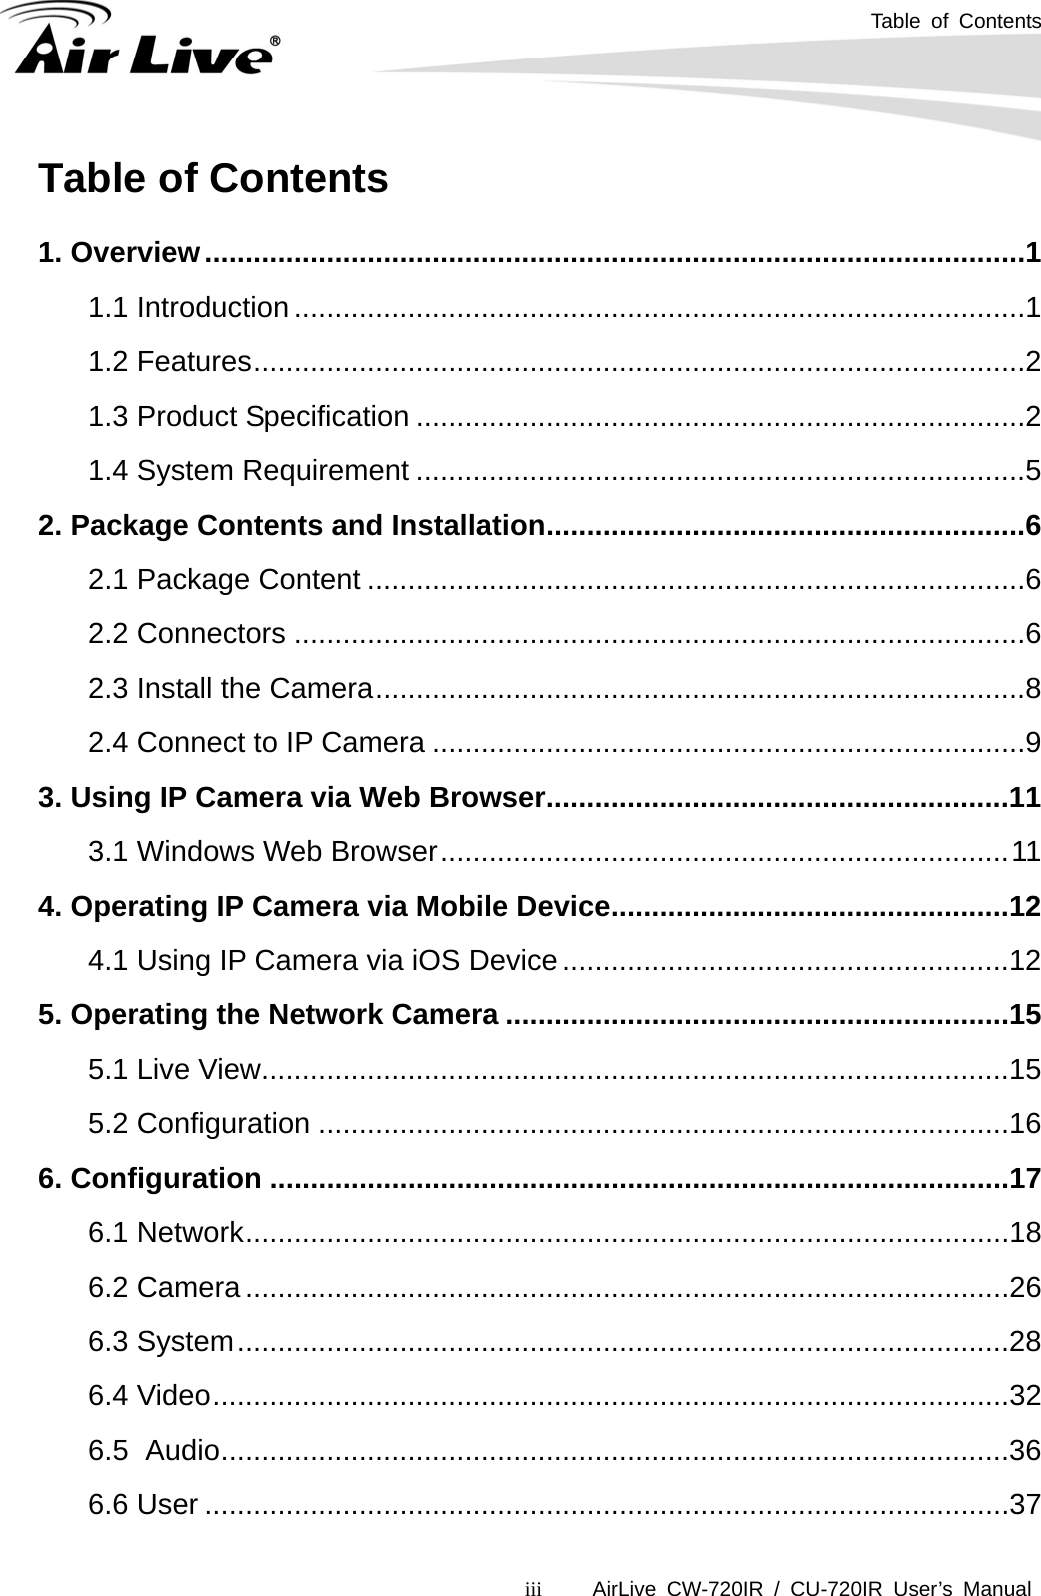 Table of Contents      AirLive CW-720IR / CU-720IR User’s Manual iiiTable of Contents  1. Overview.....................................................................................................1 1.1 Introduction..........................................................................................1 1.2 Features...............................................................................................2 1.3 Product Specification ...........................................................................2 1.4 System Requirement ...........................................................................5 2. Package Contents and Installation...........................................................6 2.1 Package Content .................................................................................6 2.2 Connectors ..........................................................................................6 2.3 Install the Camera................................................................................8 2.4 Connect to IP Camera .........................................................................9 3. Using IP Camera via Web Browser.........................................................11 3.1 Windows Web Browser......................................................................11 4. Operating IP Camera via Mobile Device.................................................12 4.1 Using IP Camera via iOS Device.......................................................12 5. Operating the Network Camera ..............................................................15 5.1 Live View............................................................................................15 5.2 Configuration .....................................................................................16 6. Configuration ...........................................................................................17 6.1 Network..............................................................................................18 6.2 Camera..............................................................................................26 6.3 System...............................................................................................28 6.4 Video..................................................................................................32 6.5 Audio.................................................................................................36 6.6 User ...................................................................................................37 